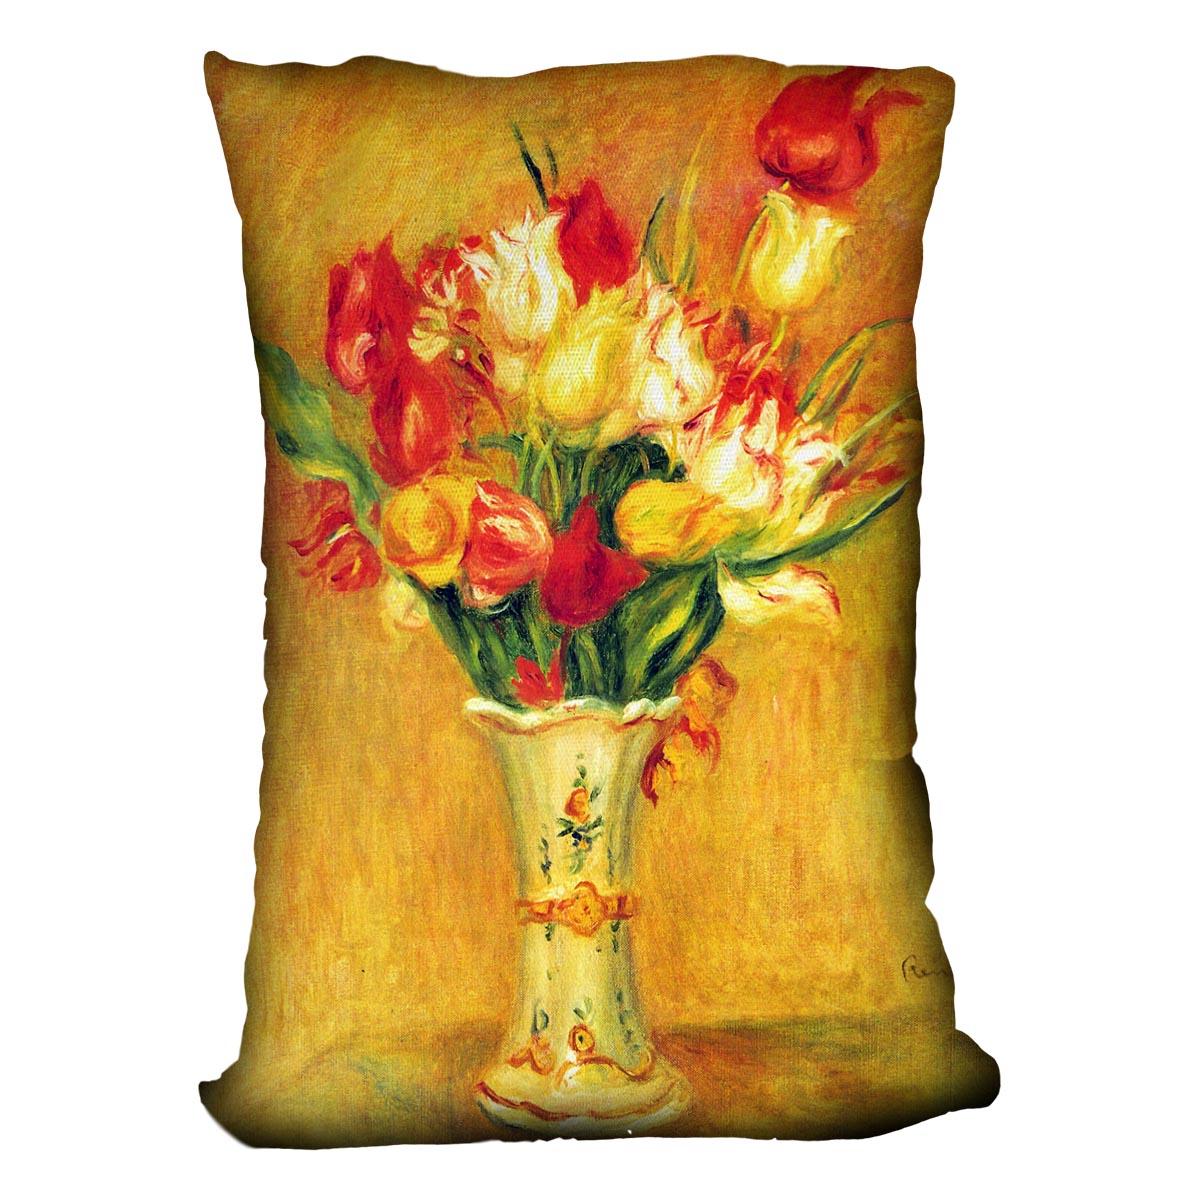 Tulips in a Vase by Renoir Cushion